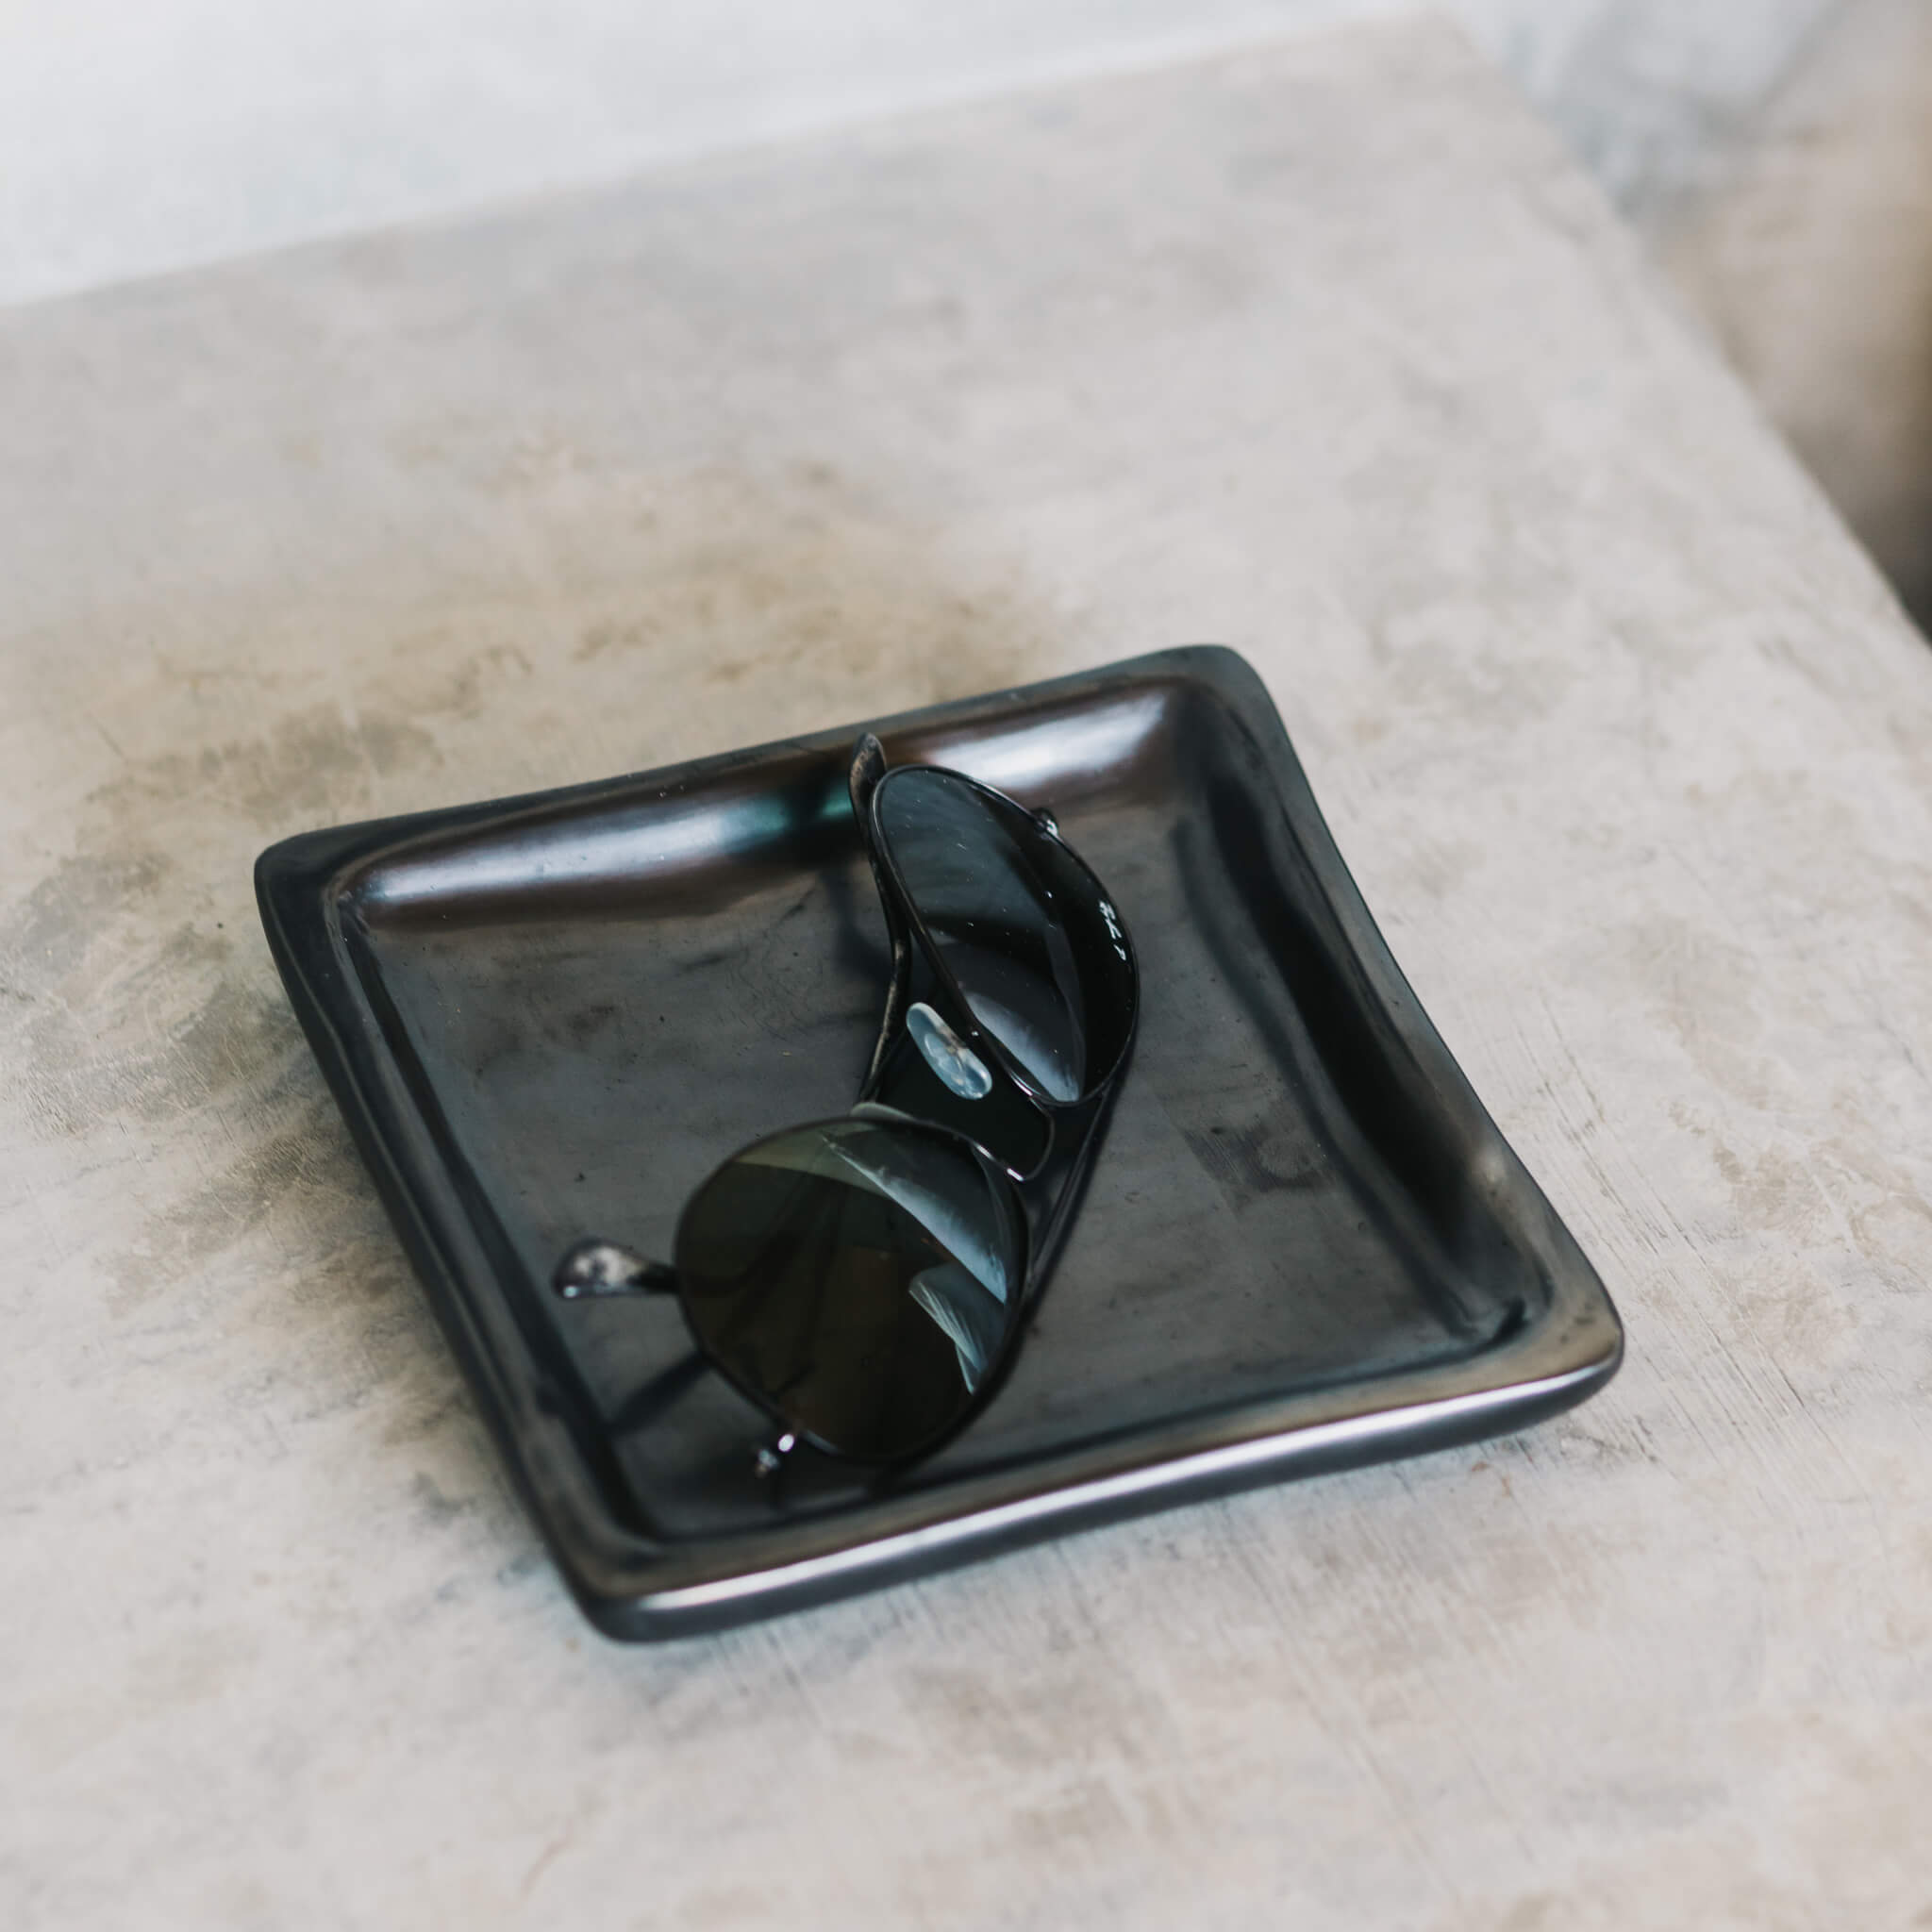 A Oaxaca pottery black clay plate used as a catchall for Raybans.